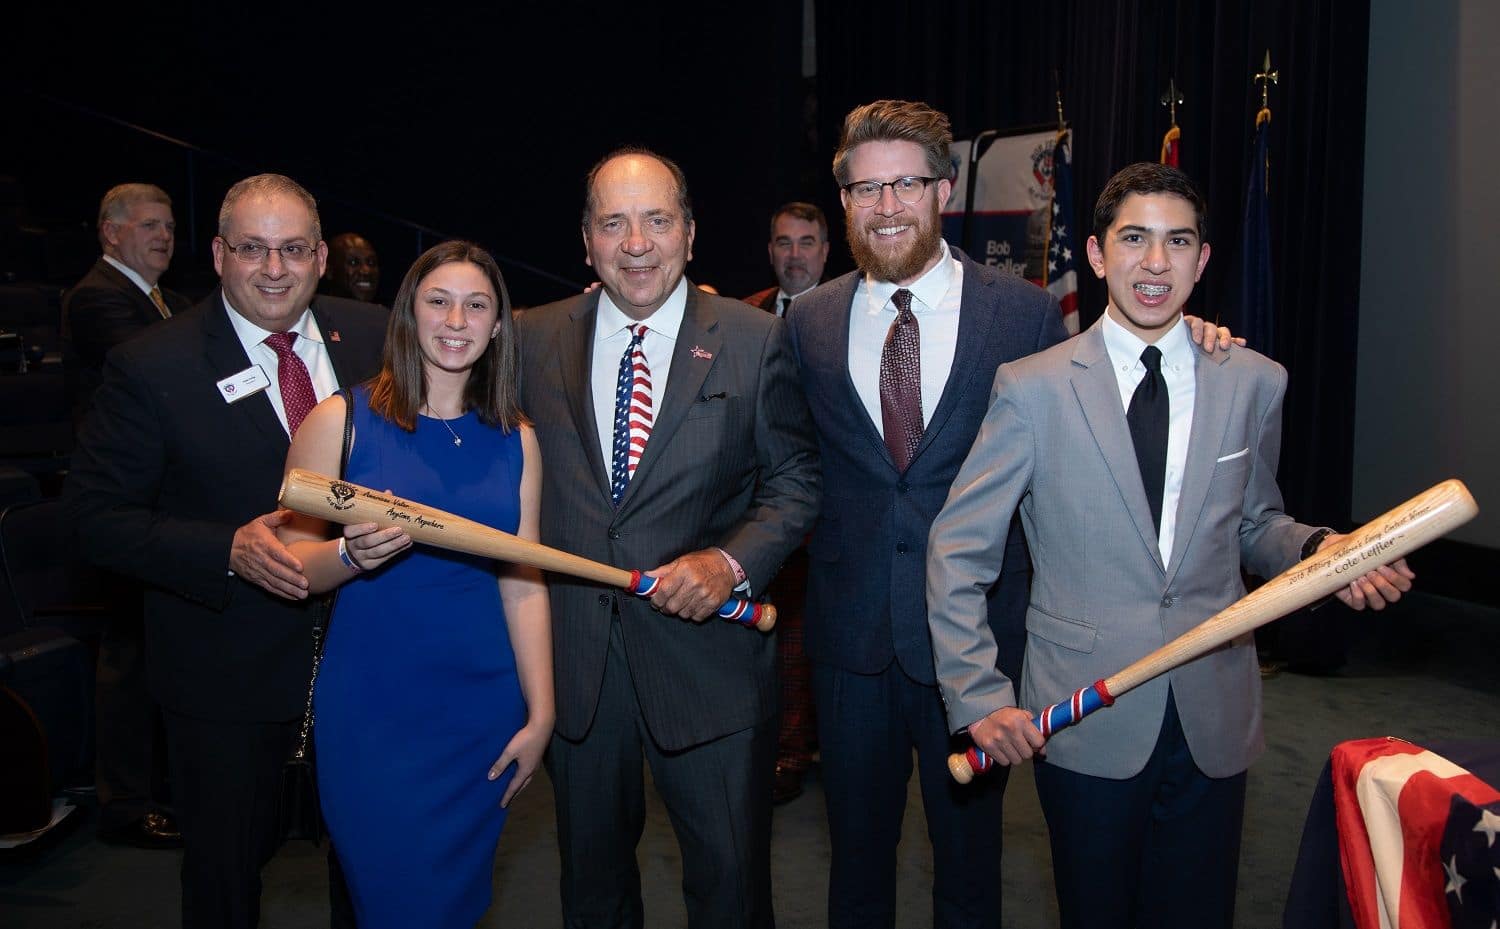 Nationals pitcher Sean Doolittle and Hall of Fame catcher Johnny Bench pose with Cole Leffler and Alyssa Gerhart, winners of the Military Children Award, and Bob Feller Act of Valor Award Foundation President Peter Fertig. (Courtesy: Jeff Malet Photography)